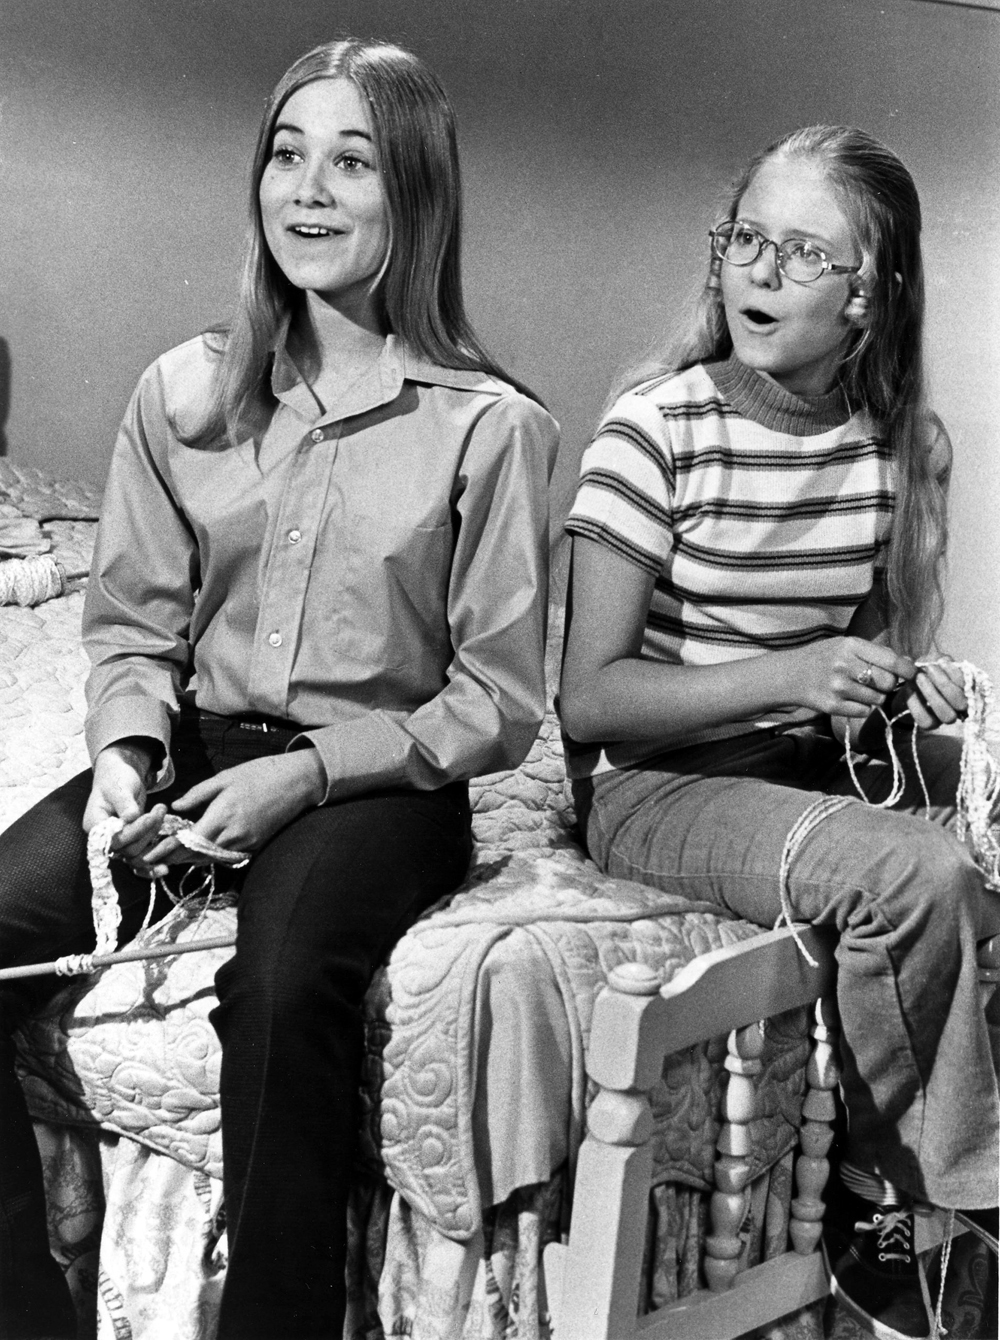 Former child stars Maureen McCormick and Eve Plumb on the set of The Brady Bunch in the 1970s